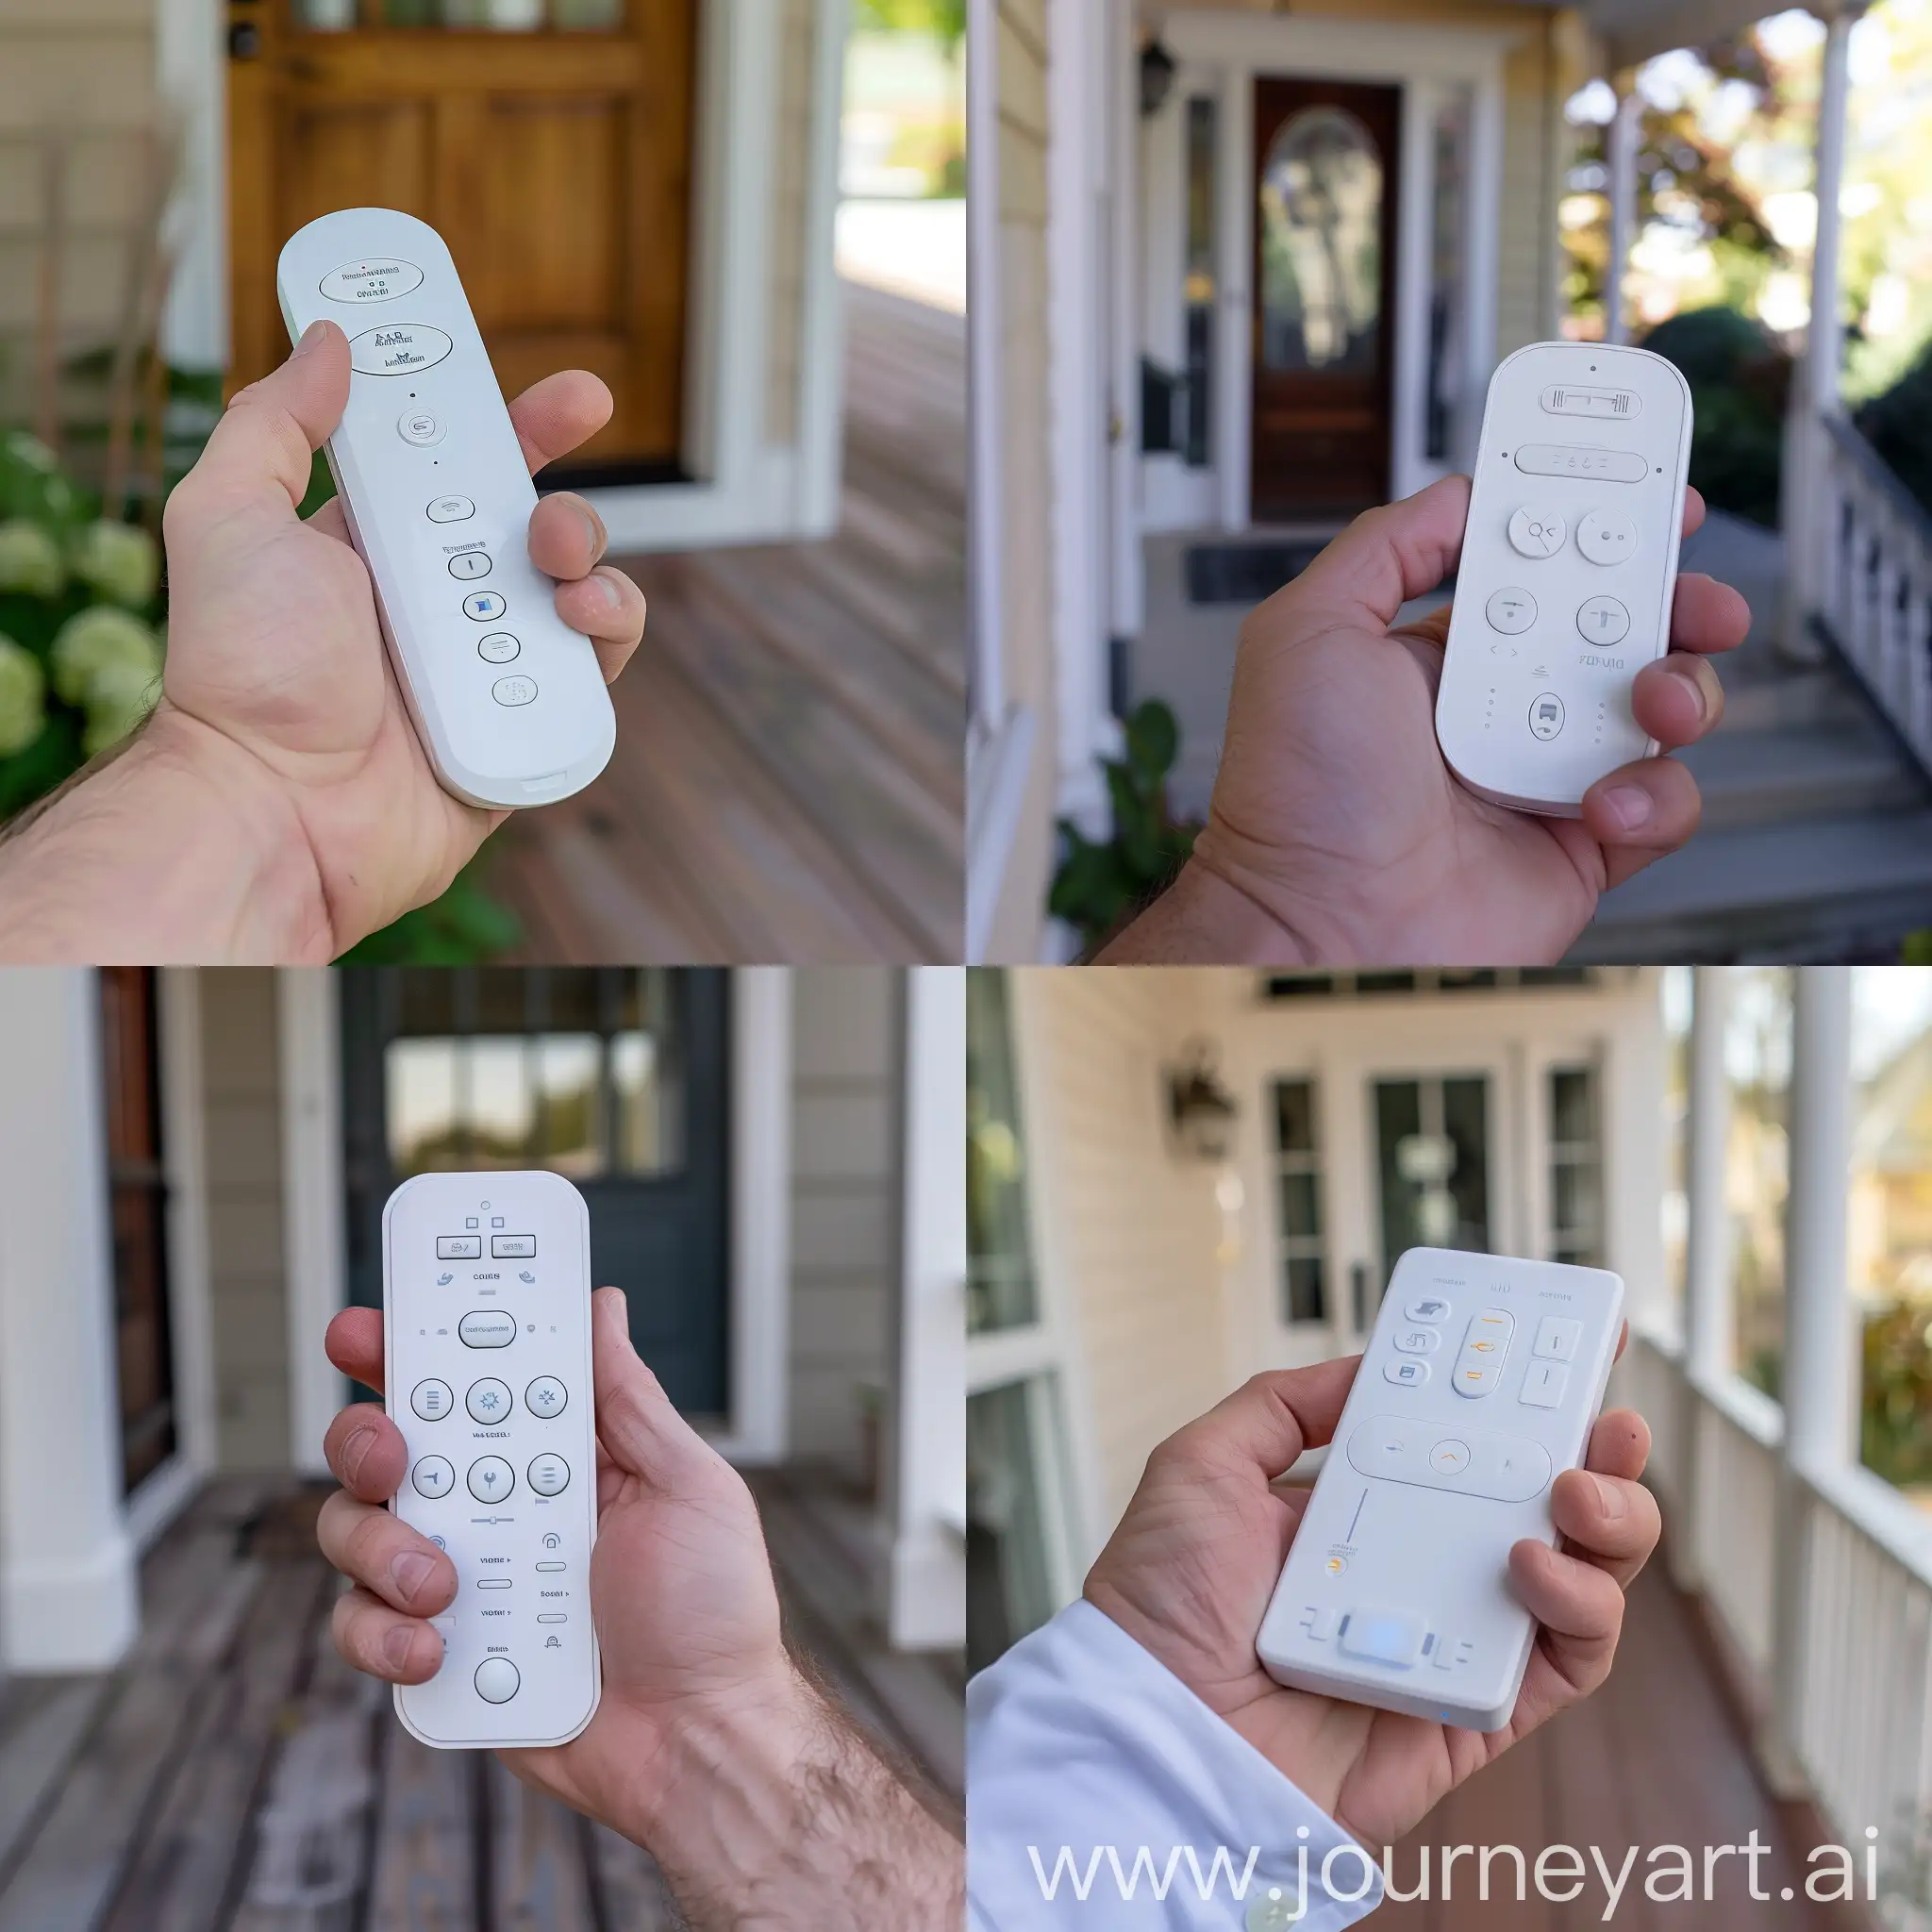 First person view, first person angle of a Male white hand holding a white technological control remote, white remote control with three buttons, House porch door background, blurry background of a house porch outside